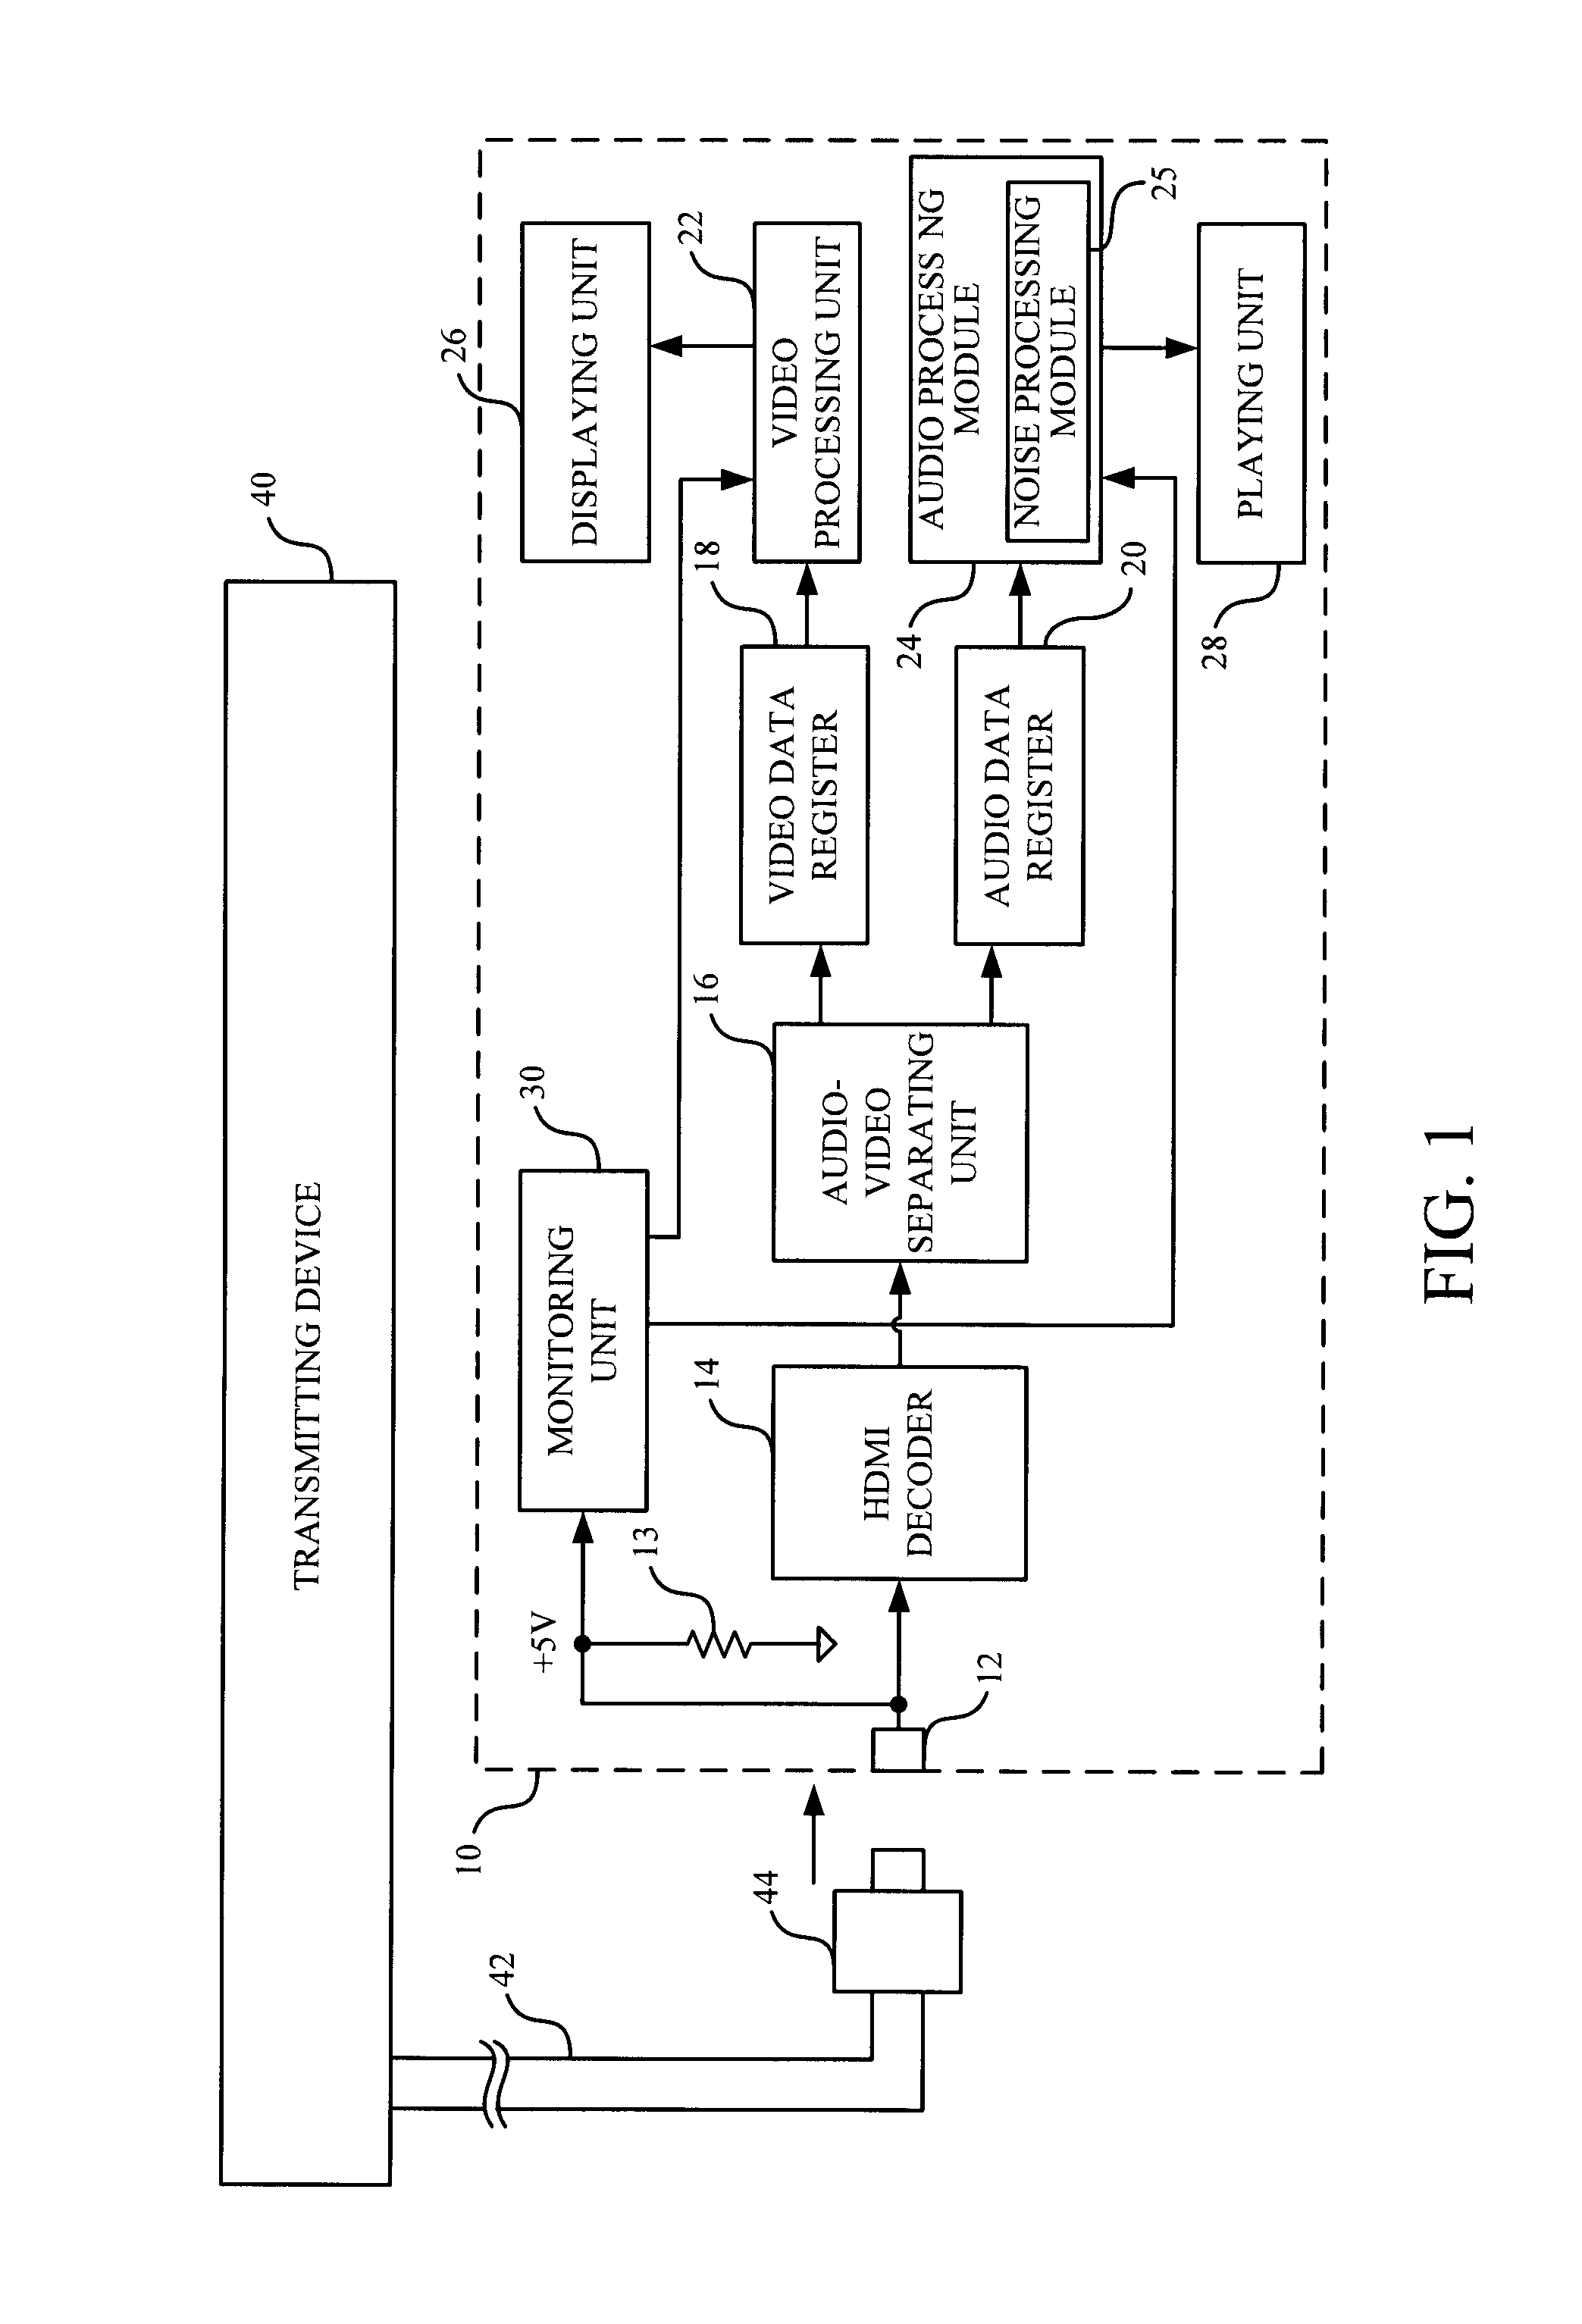 Receiving device for audio-video system